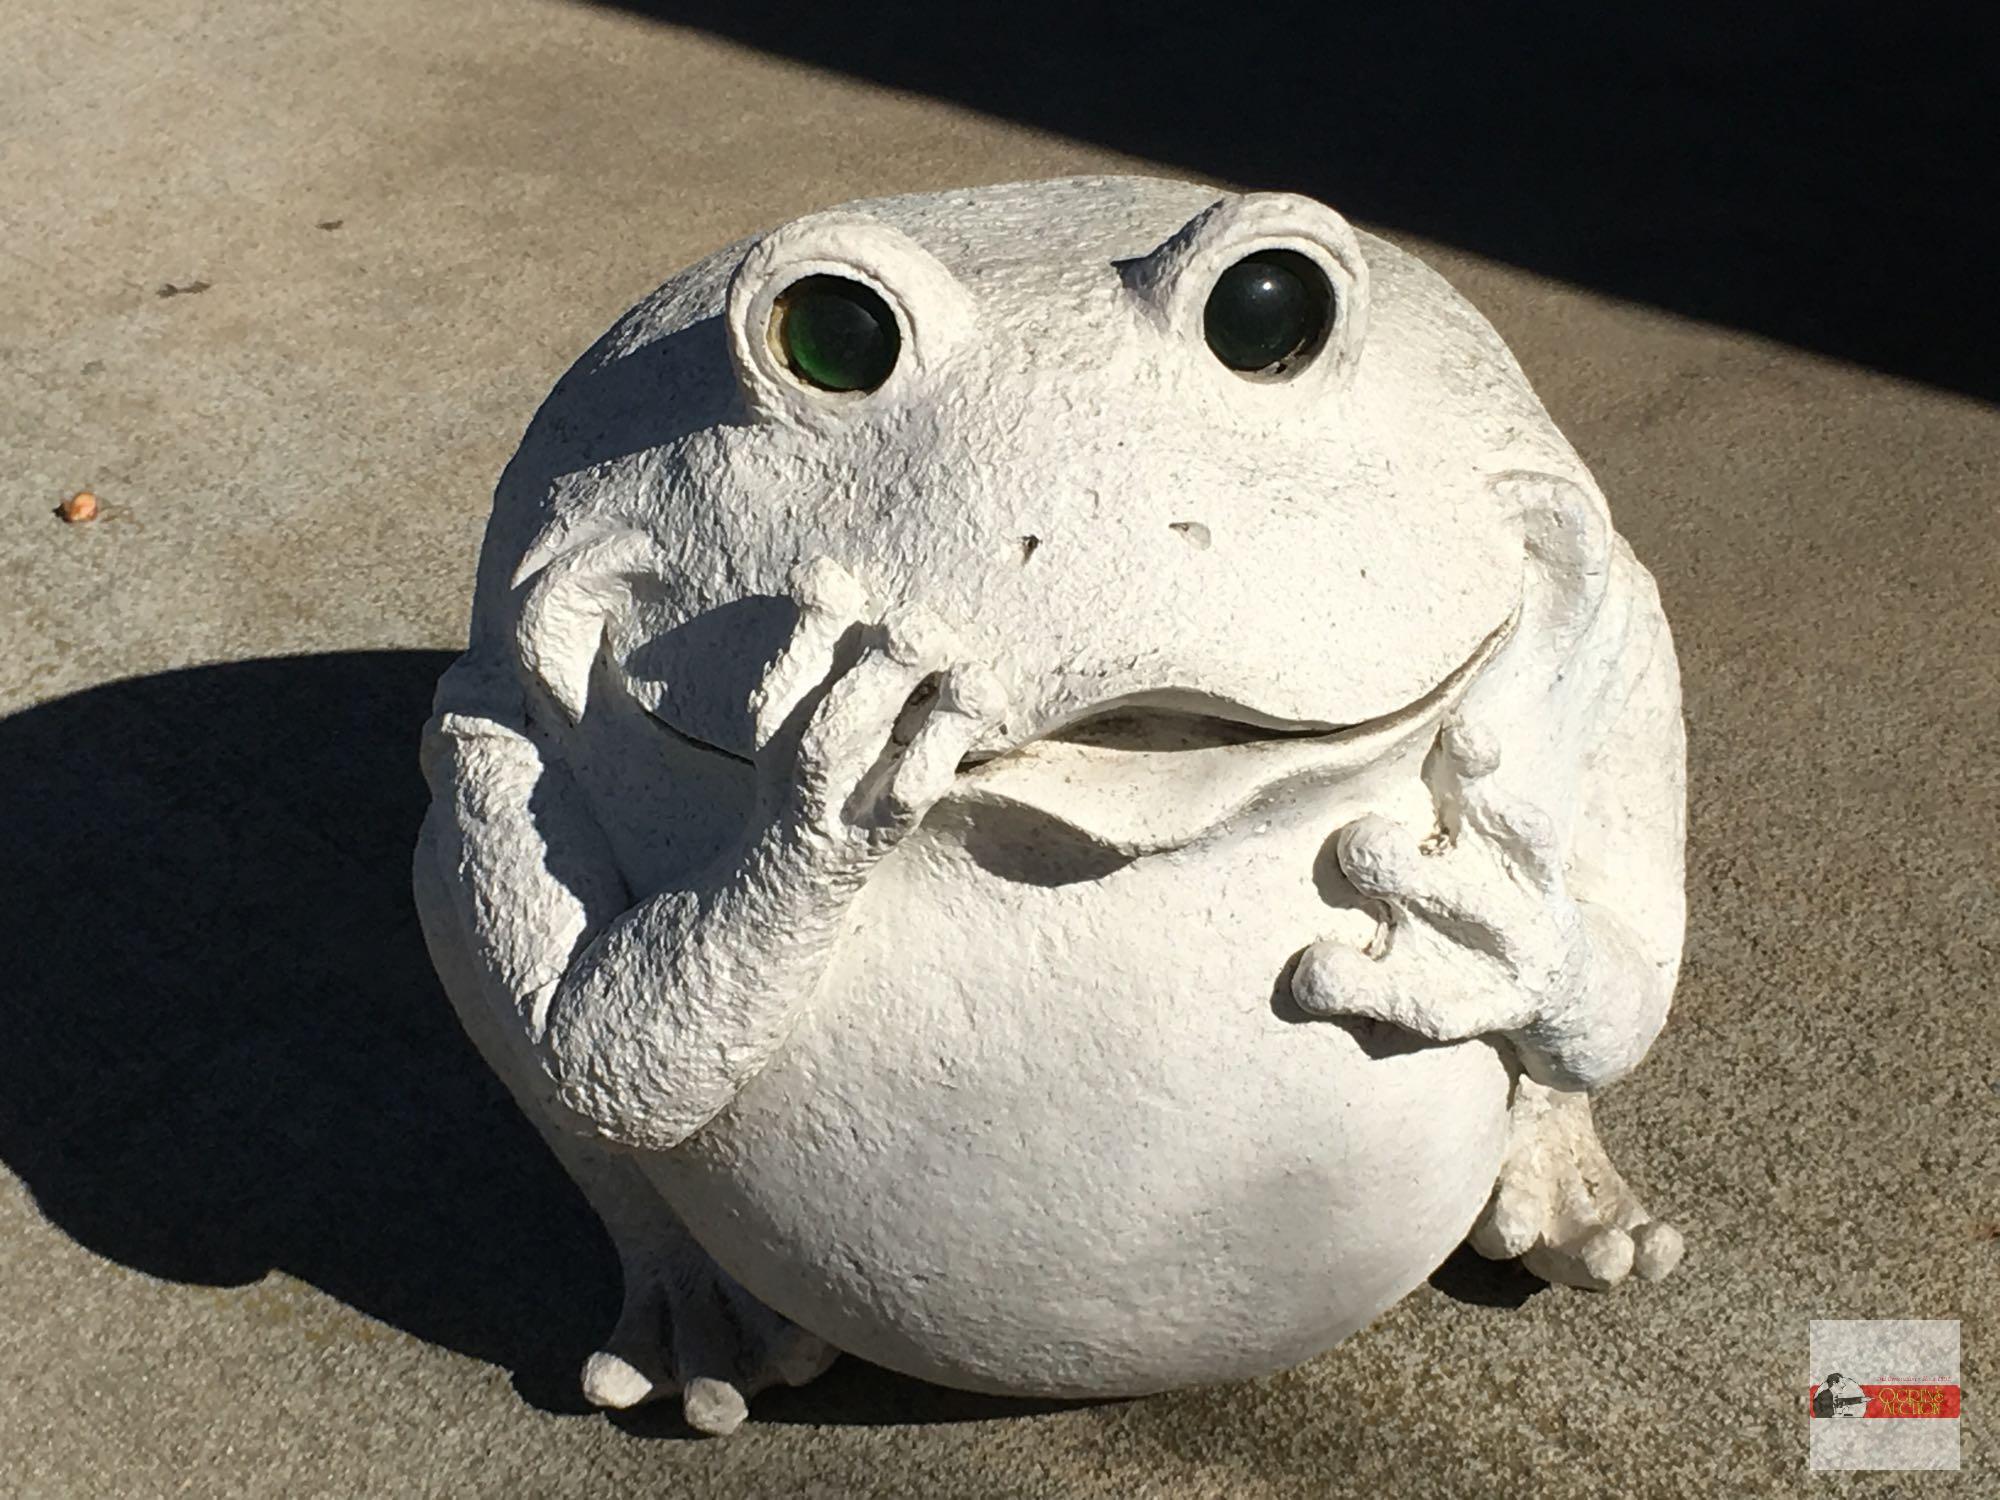 Yard & Garden - 2 - Cement tree frog statue 12"hx11"w & resin bull frog 9.5"wx10"h, (1 foot as is)